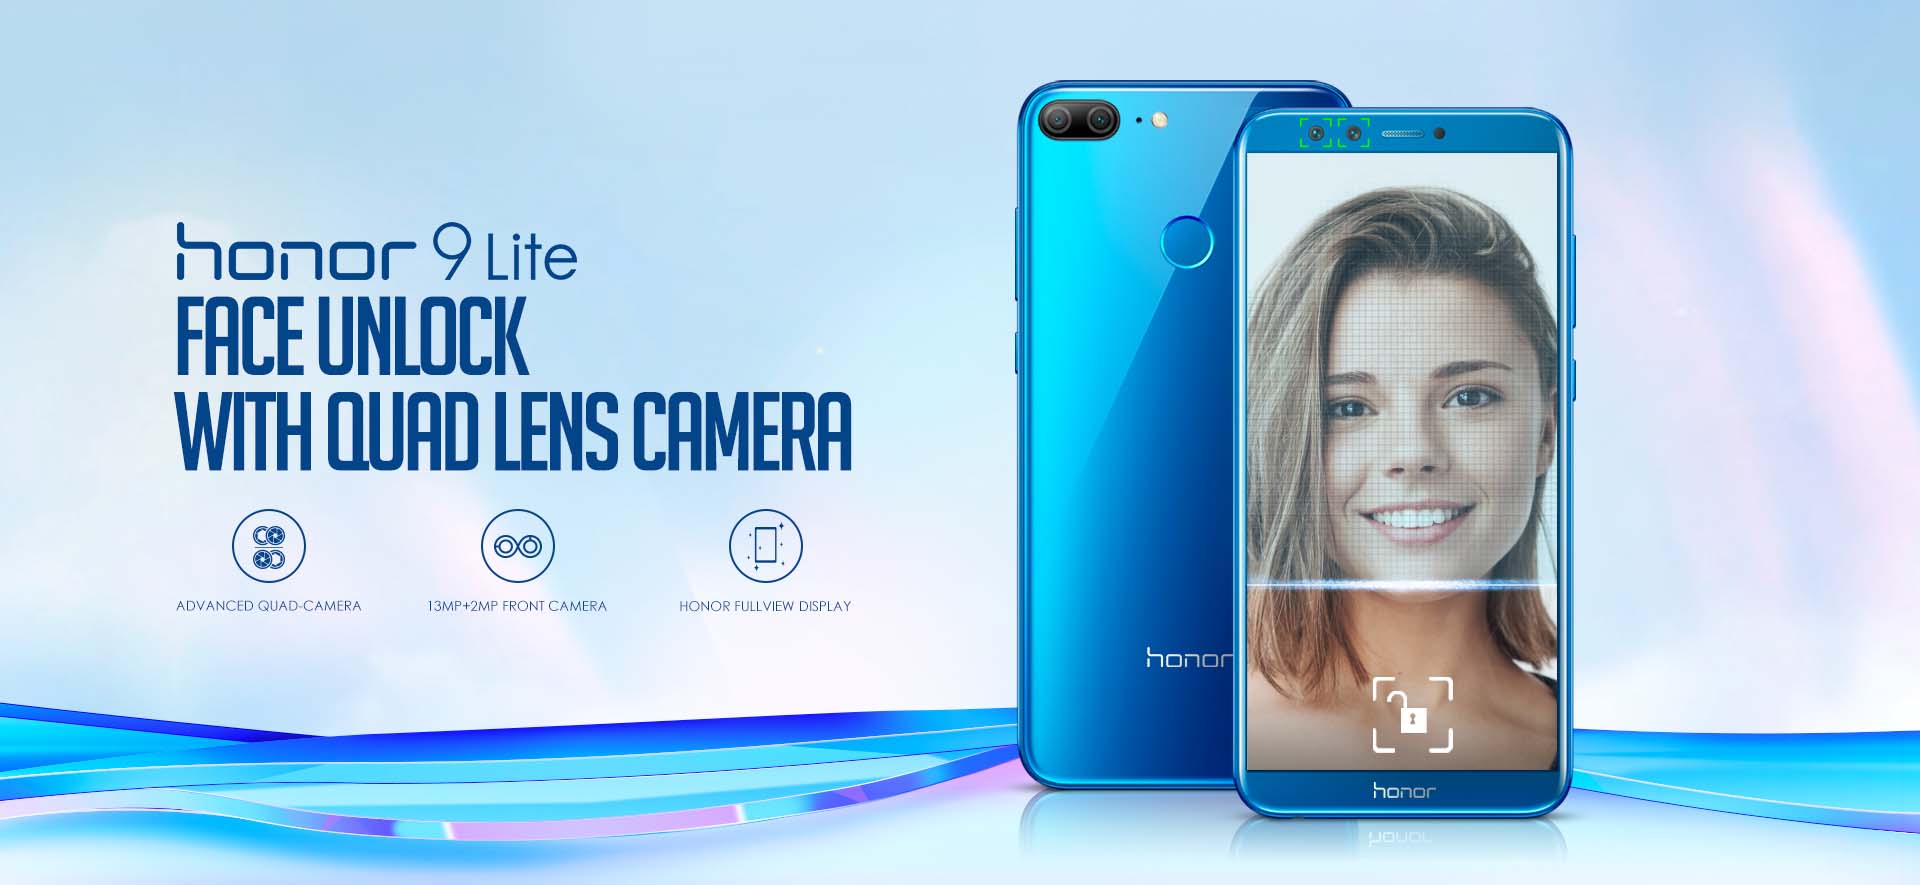 Honor 9 Lite with 32GB storage and Android 8.0 Oreo sale on Flipkart today